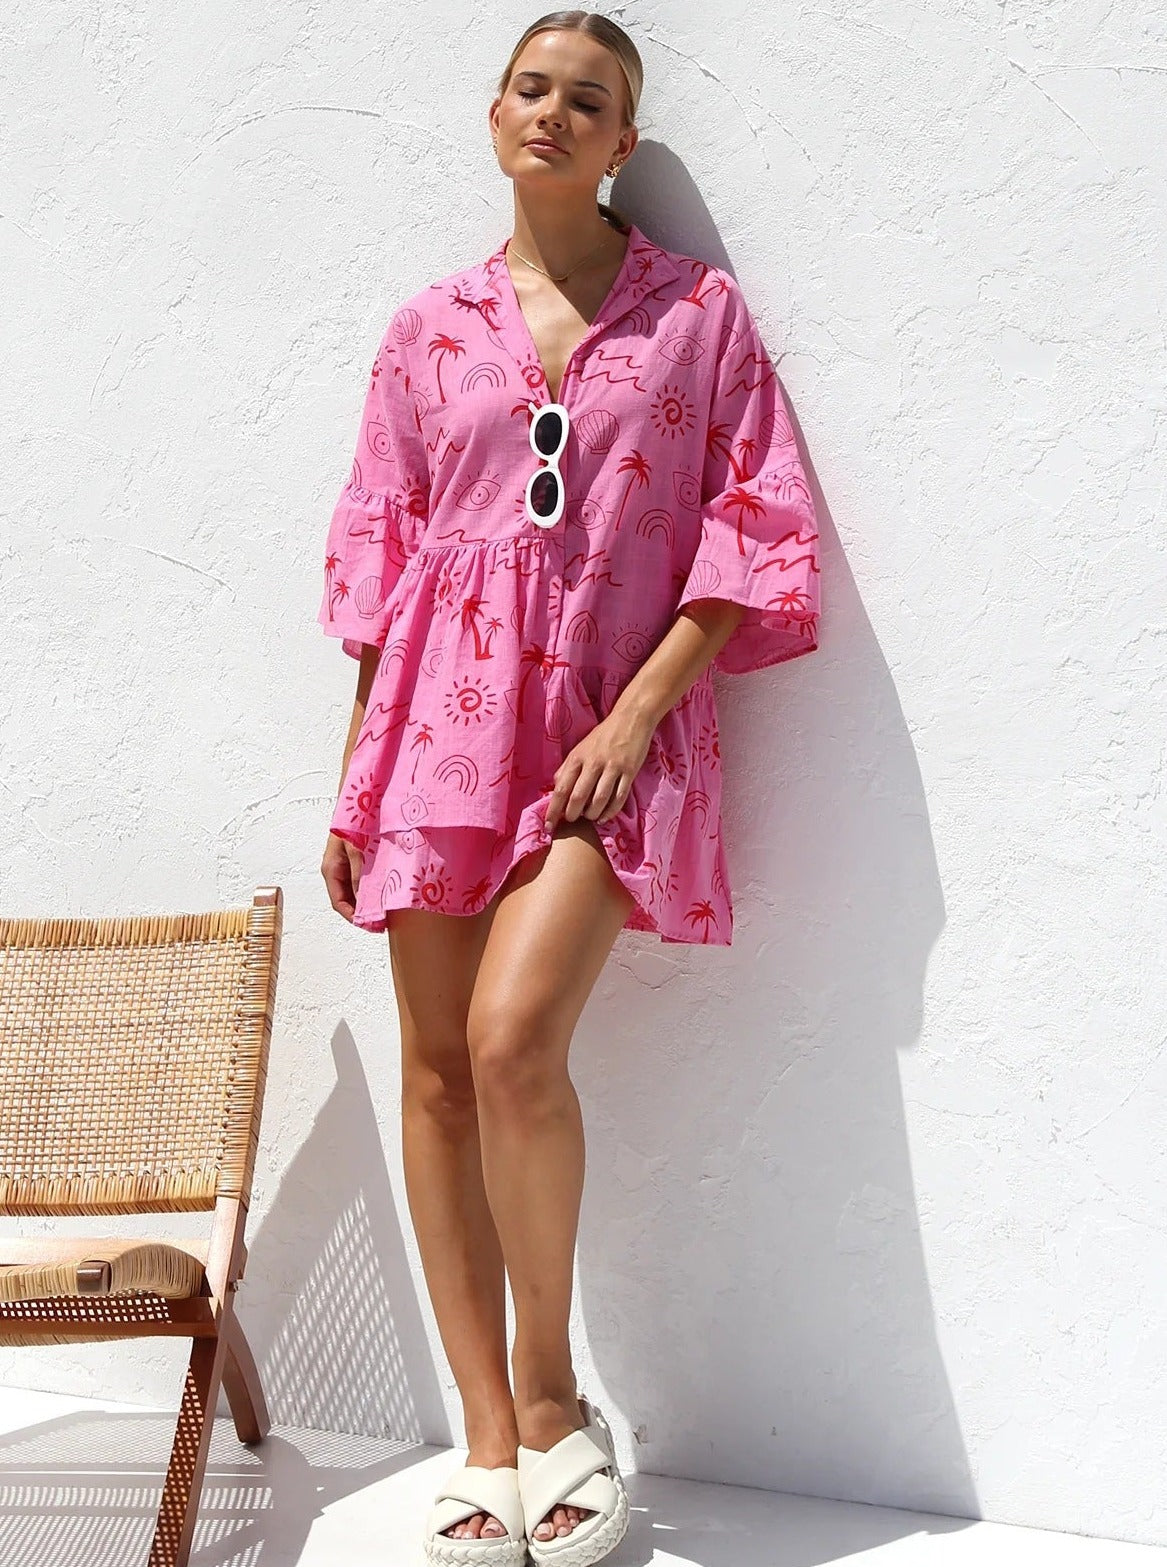 Simple Pink Ethnic Style Loose Shirt Short Dress